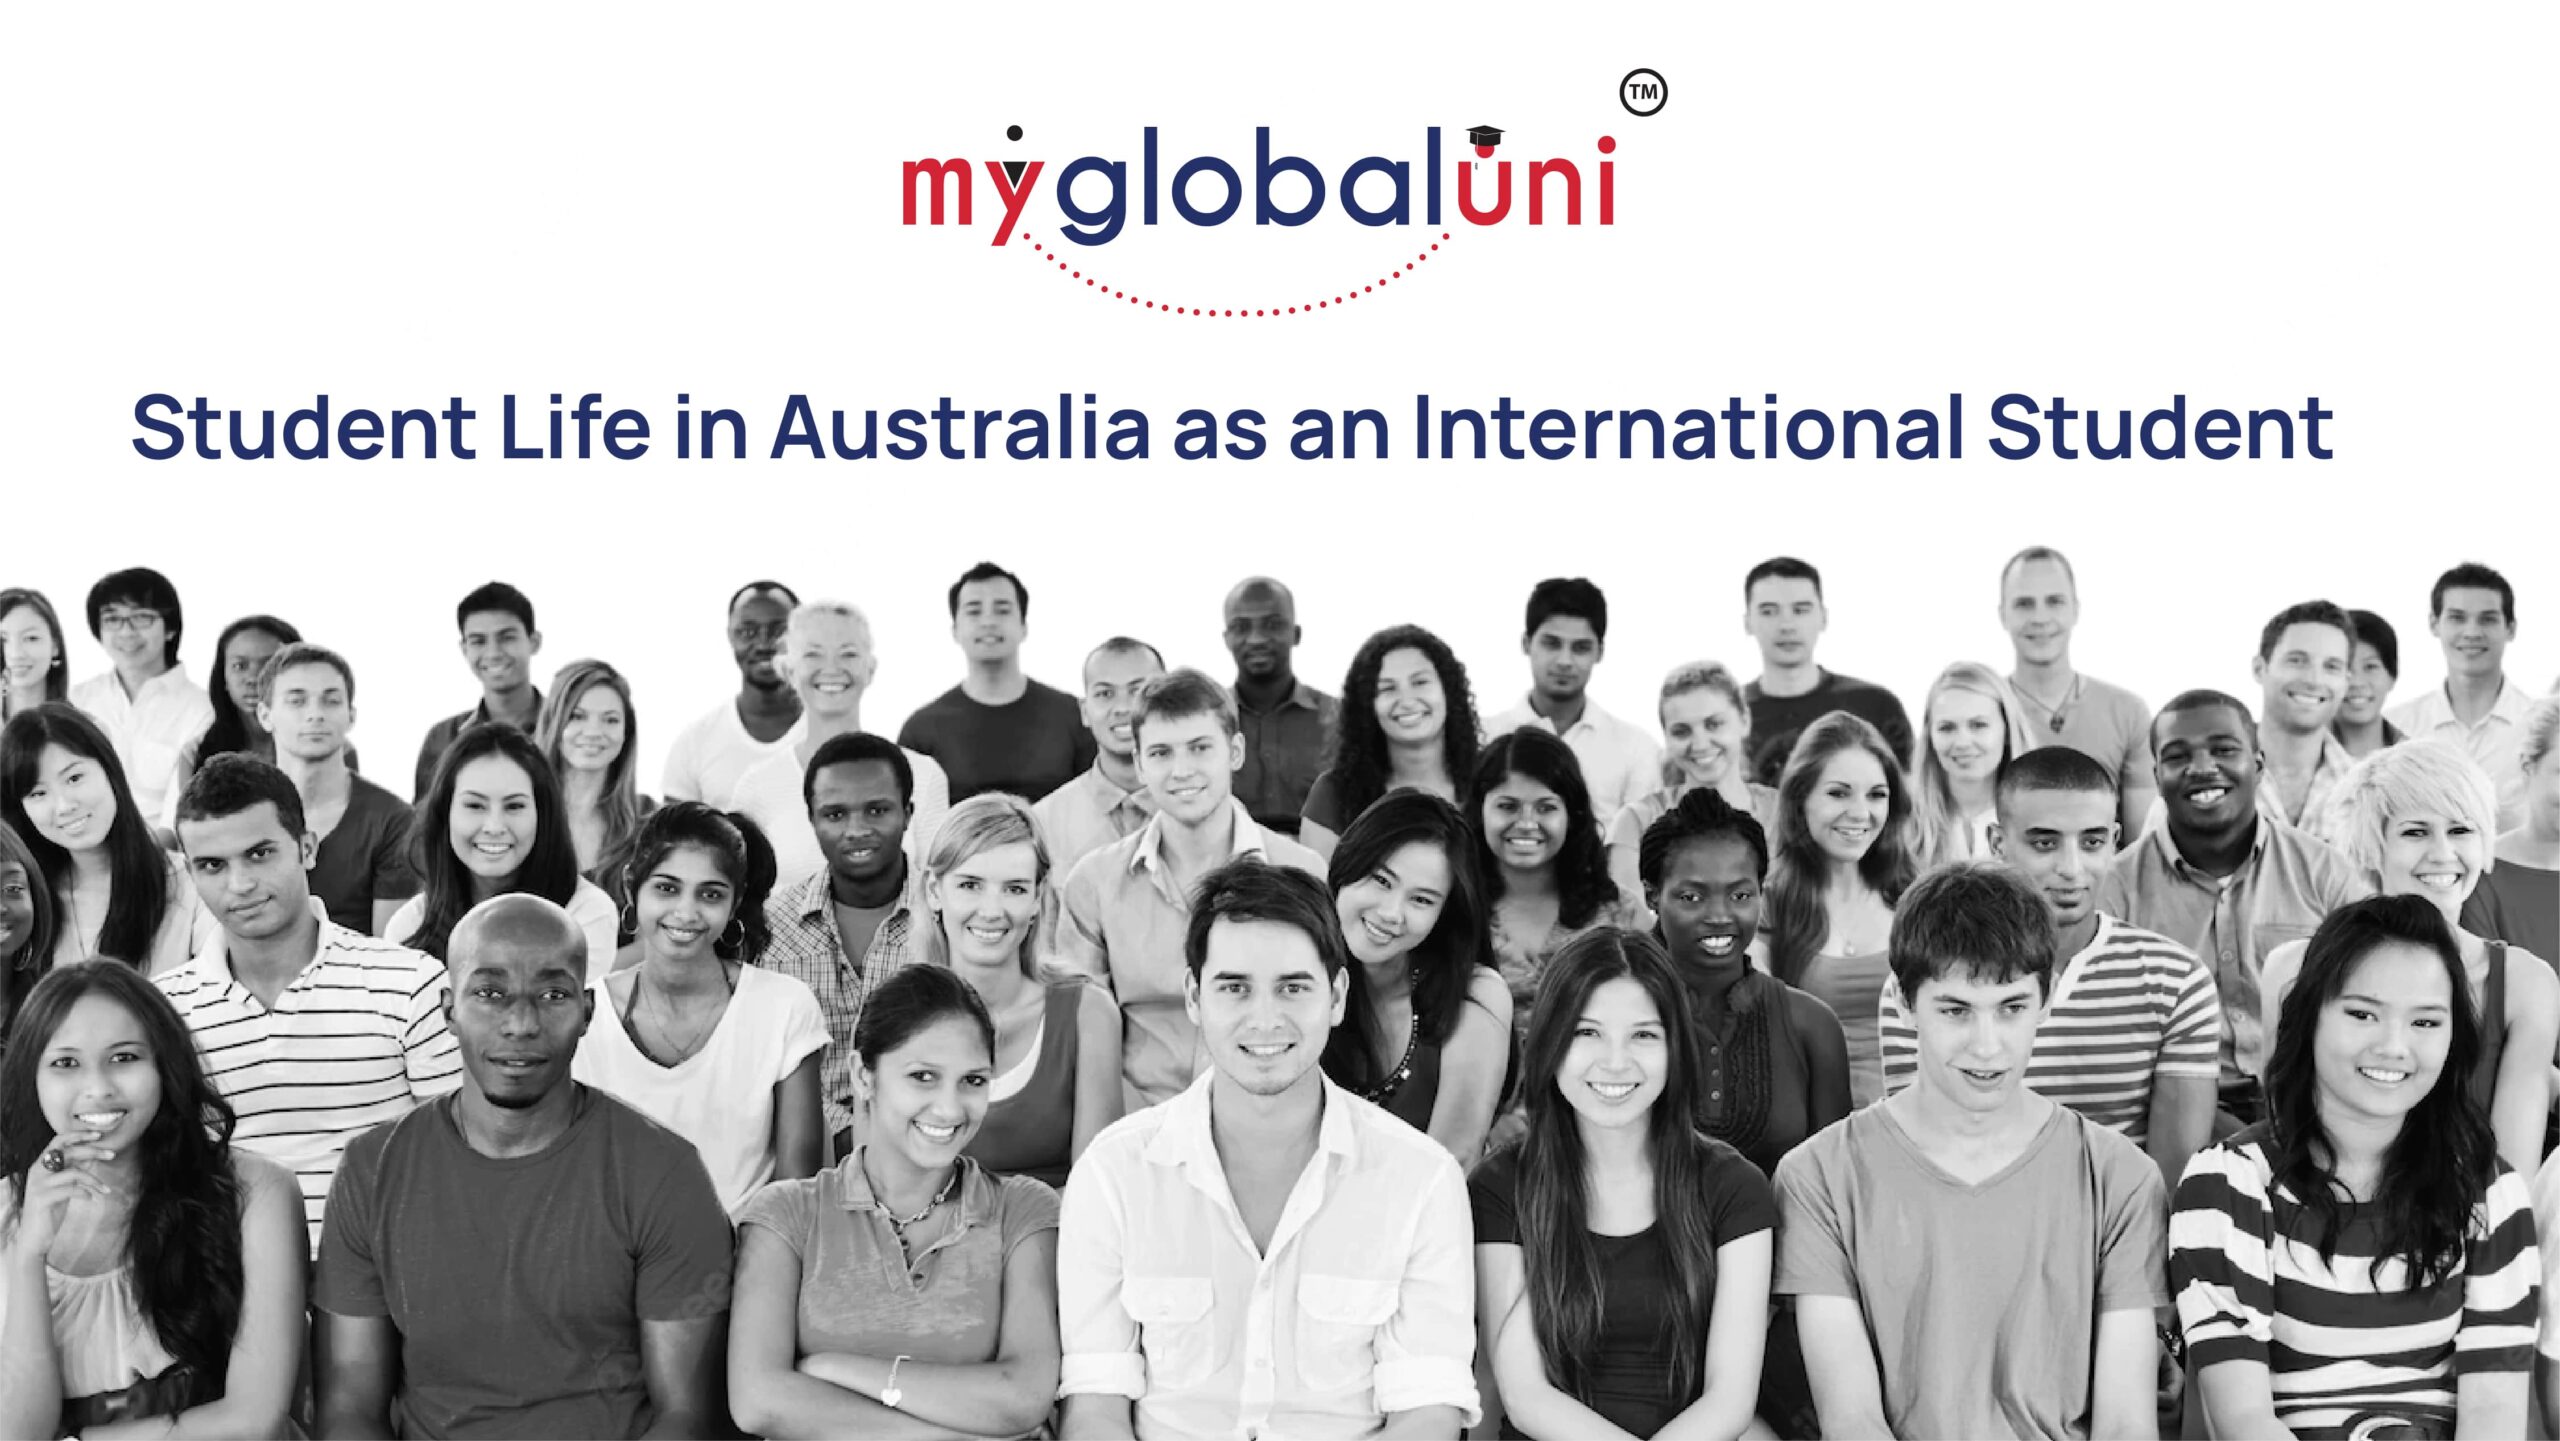 Student Life in Australia as an International Student